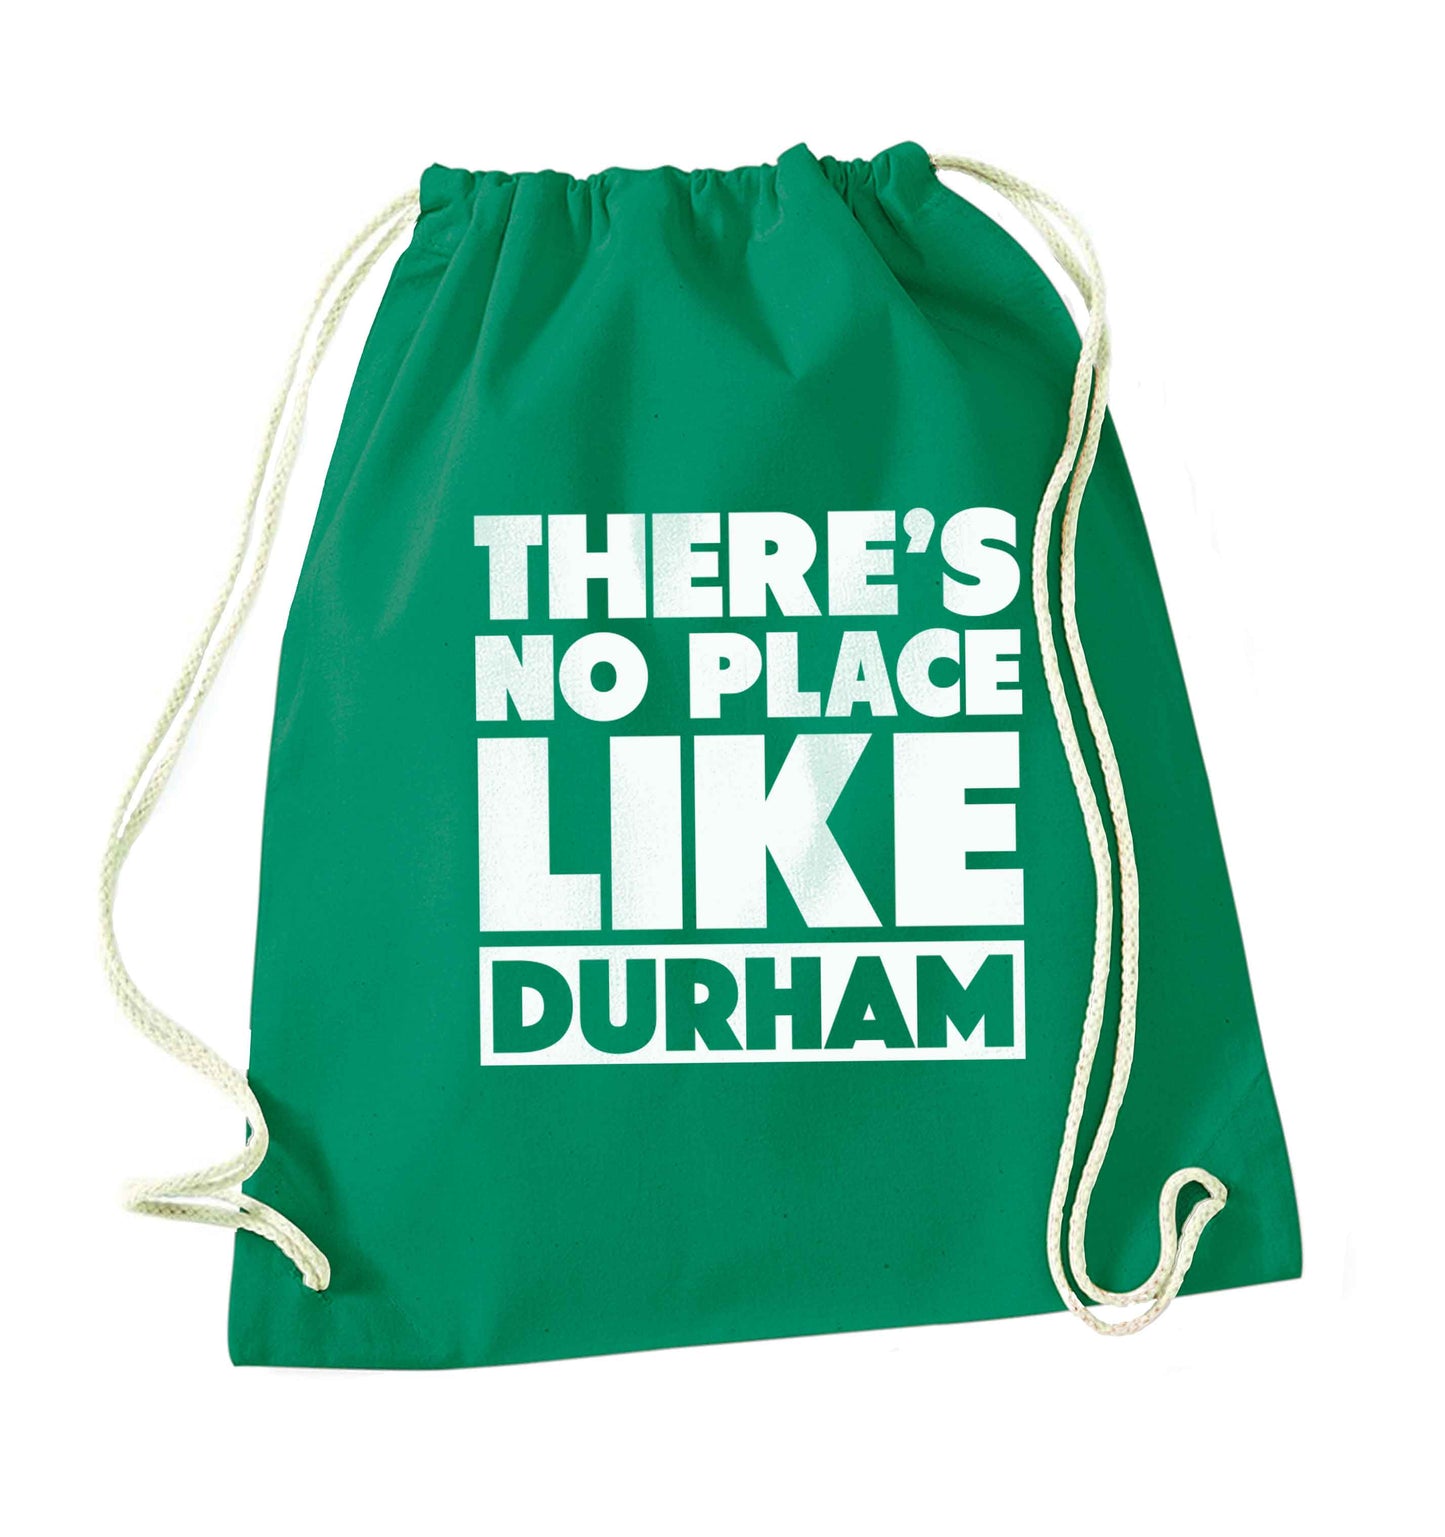 There's no place like Durham green drawstring bag